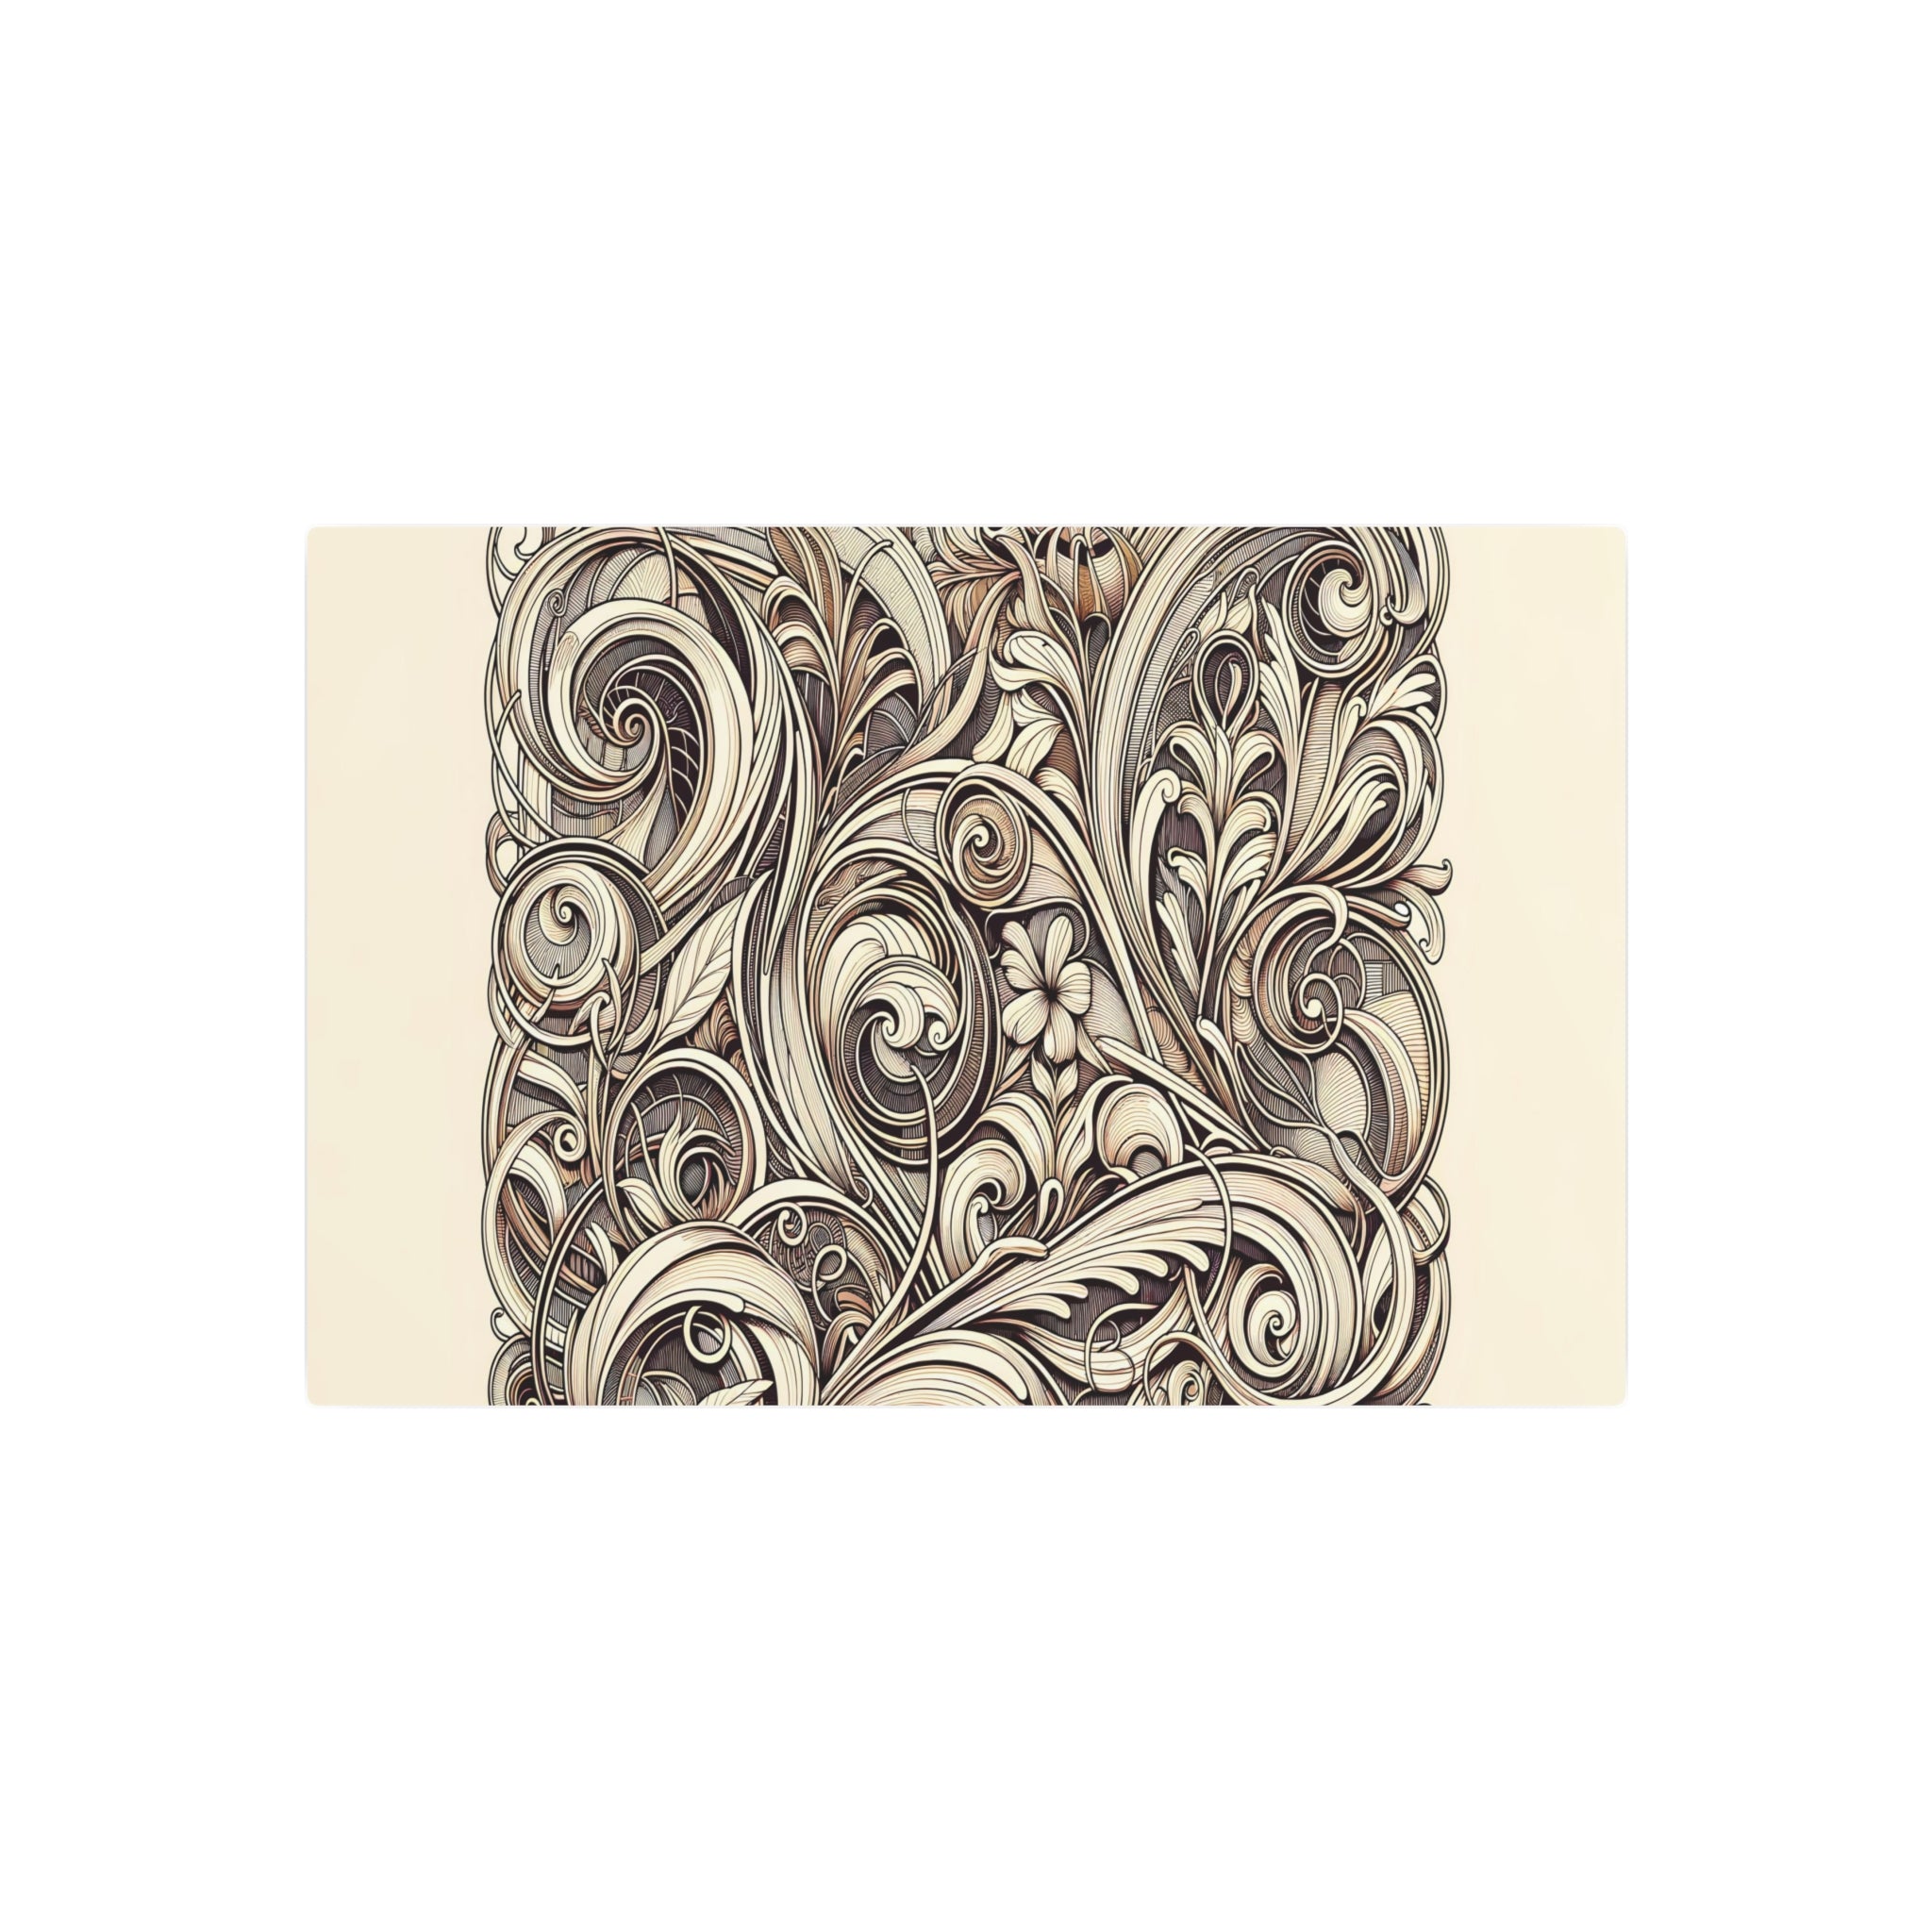 Metal Poster Art | "Art Nouveau Style Decorative Art Print - Intricate Floral Design Inspired by Late 19th Century Western Art Styles"